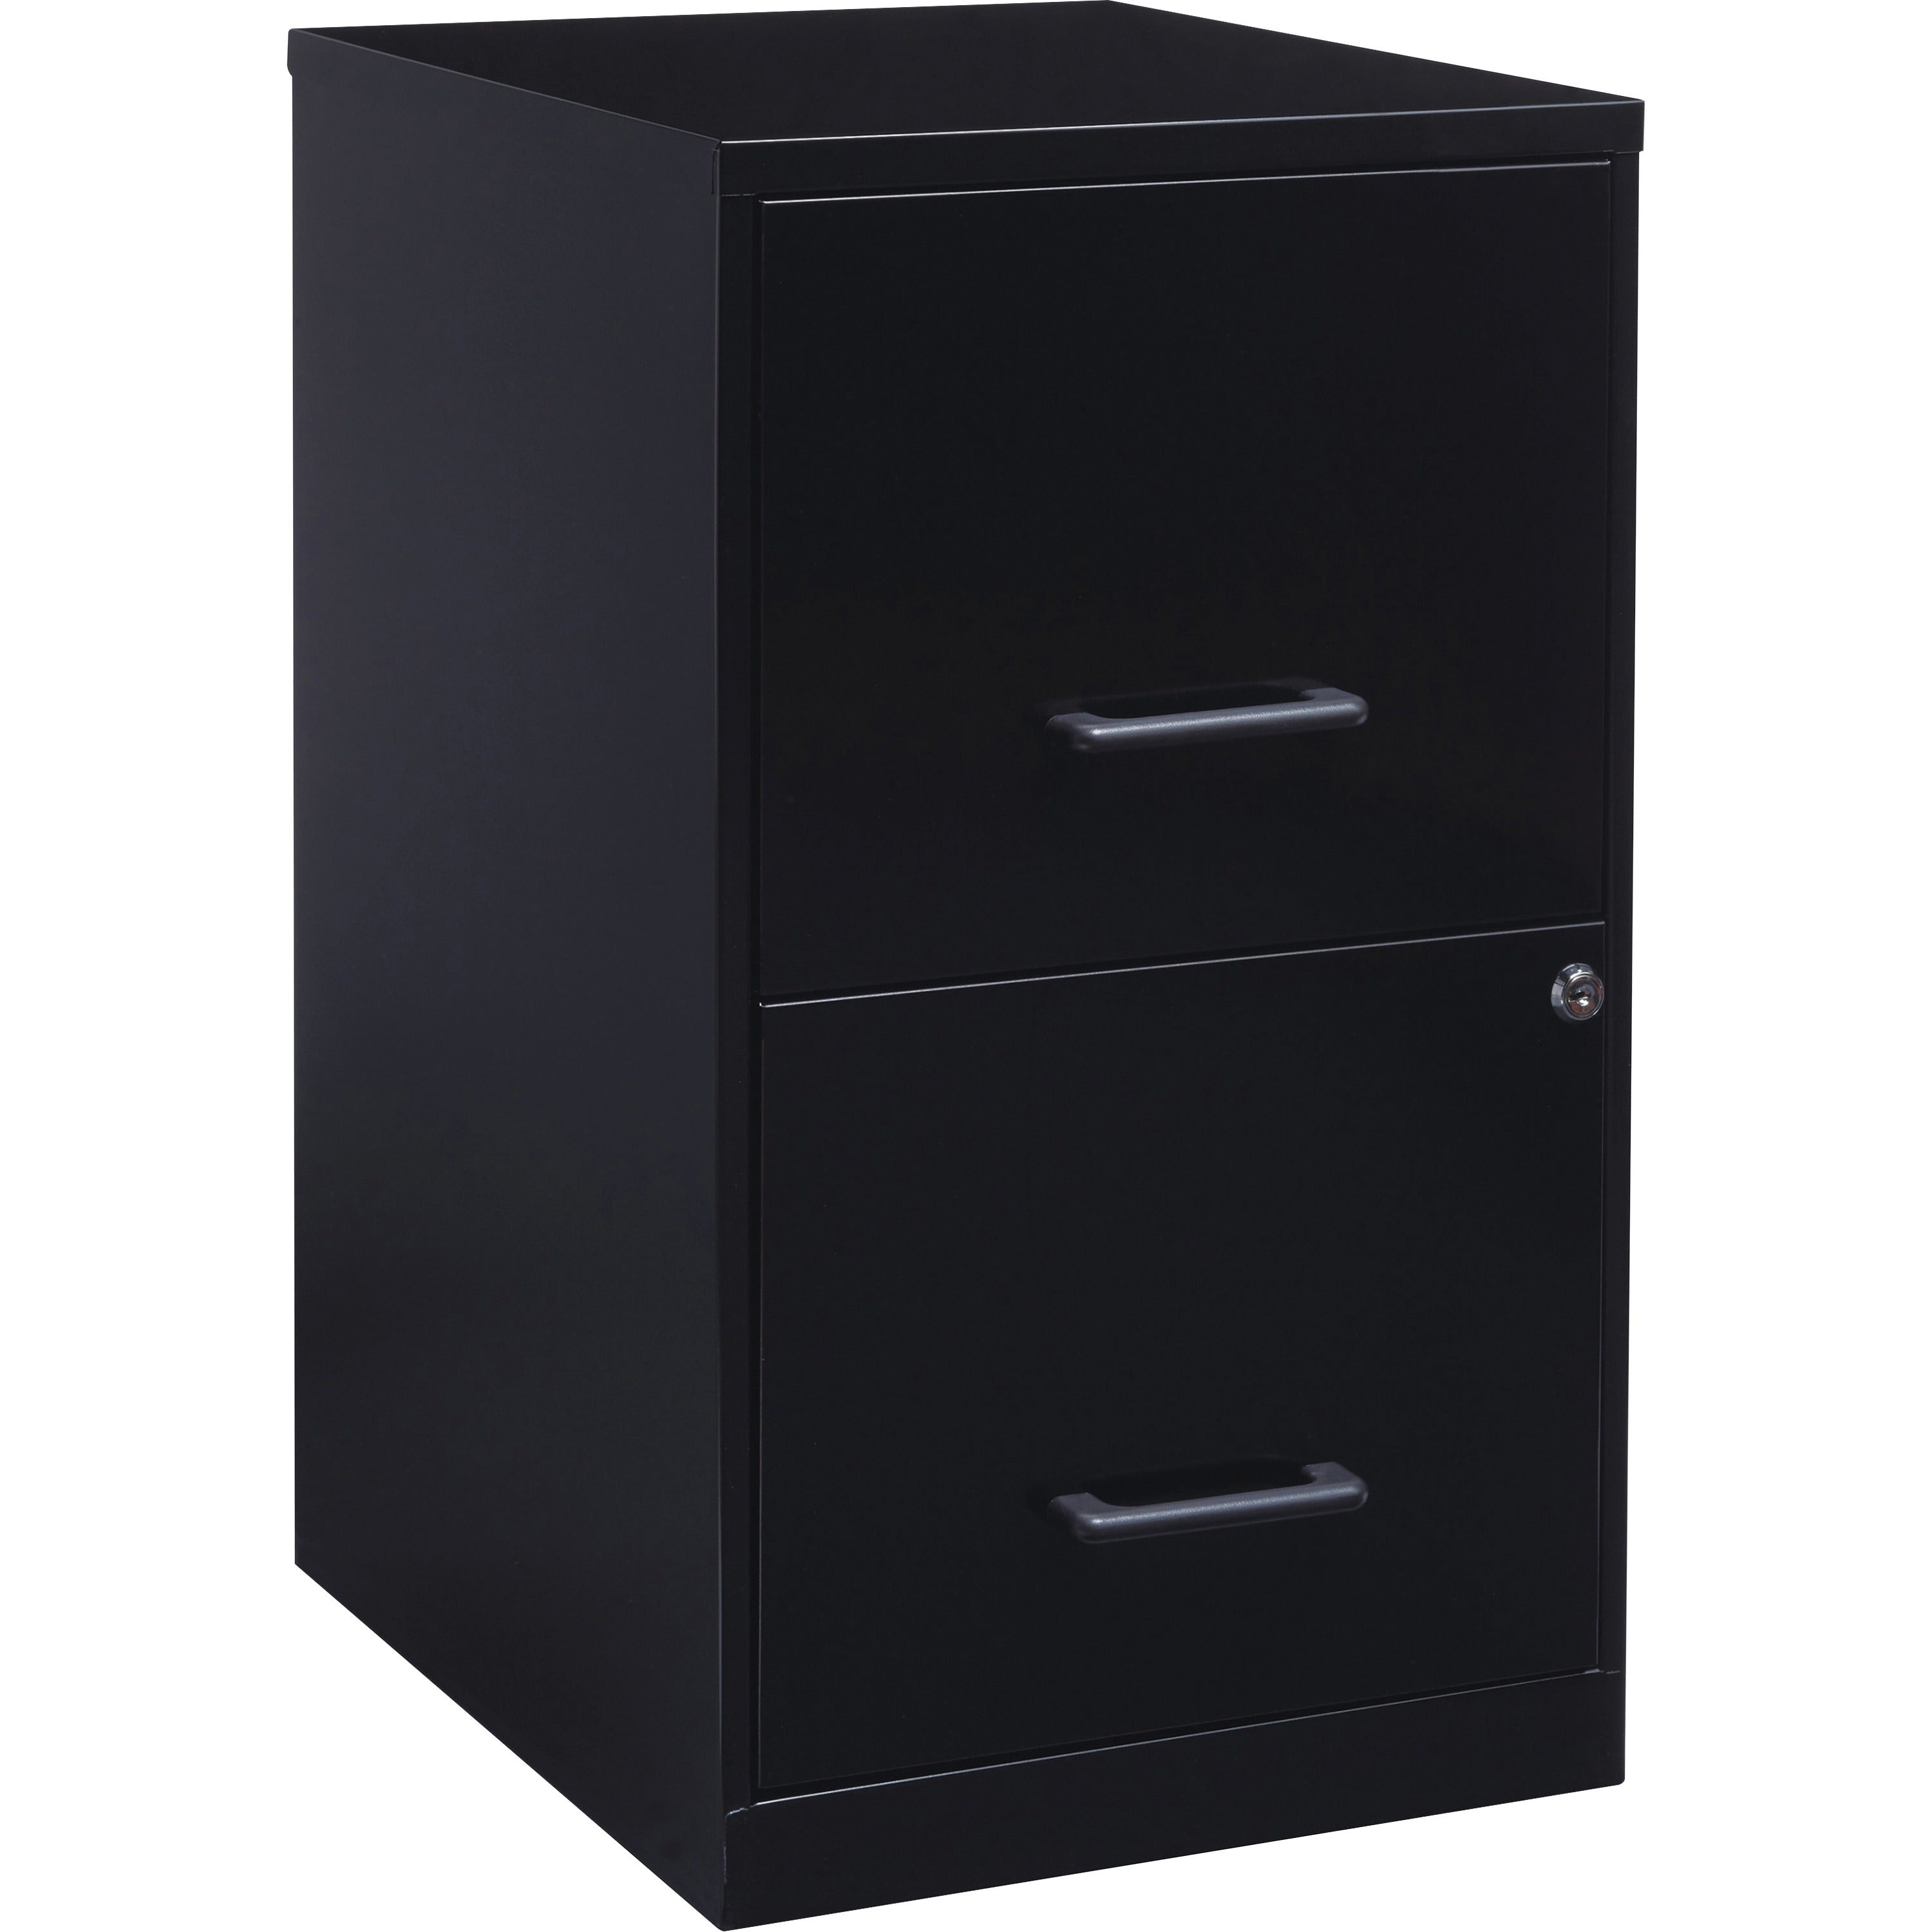 nusparc-file-cabinet-142-x-18-x-245-2-x-drawers-for-file-letter-vertical-locking-drawer-glide-suspension-nonporous-surface-black-baked-enamel-steel-recycled_nprvf218aabk - 4